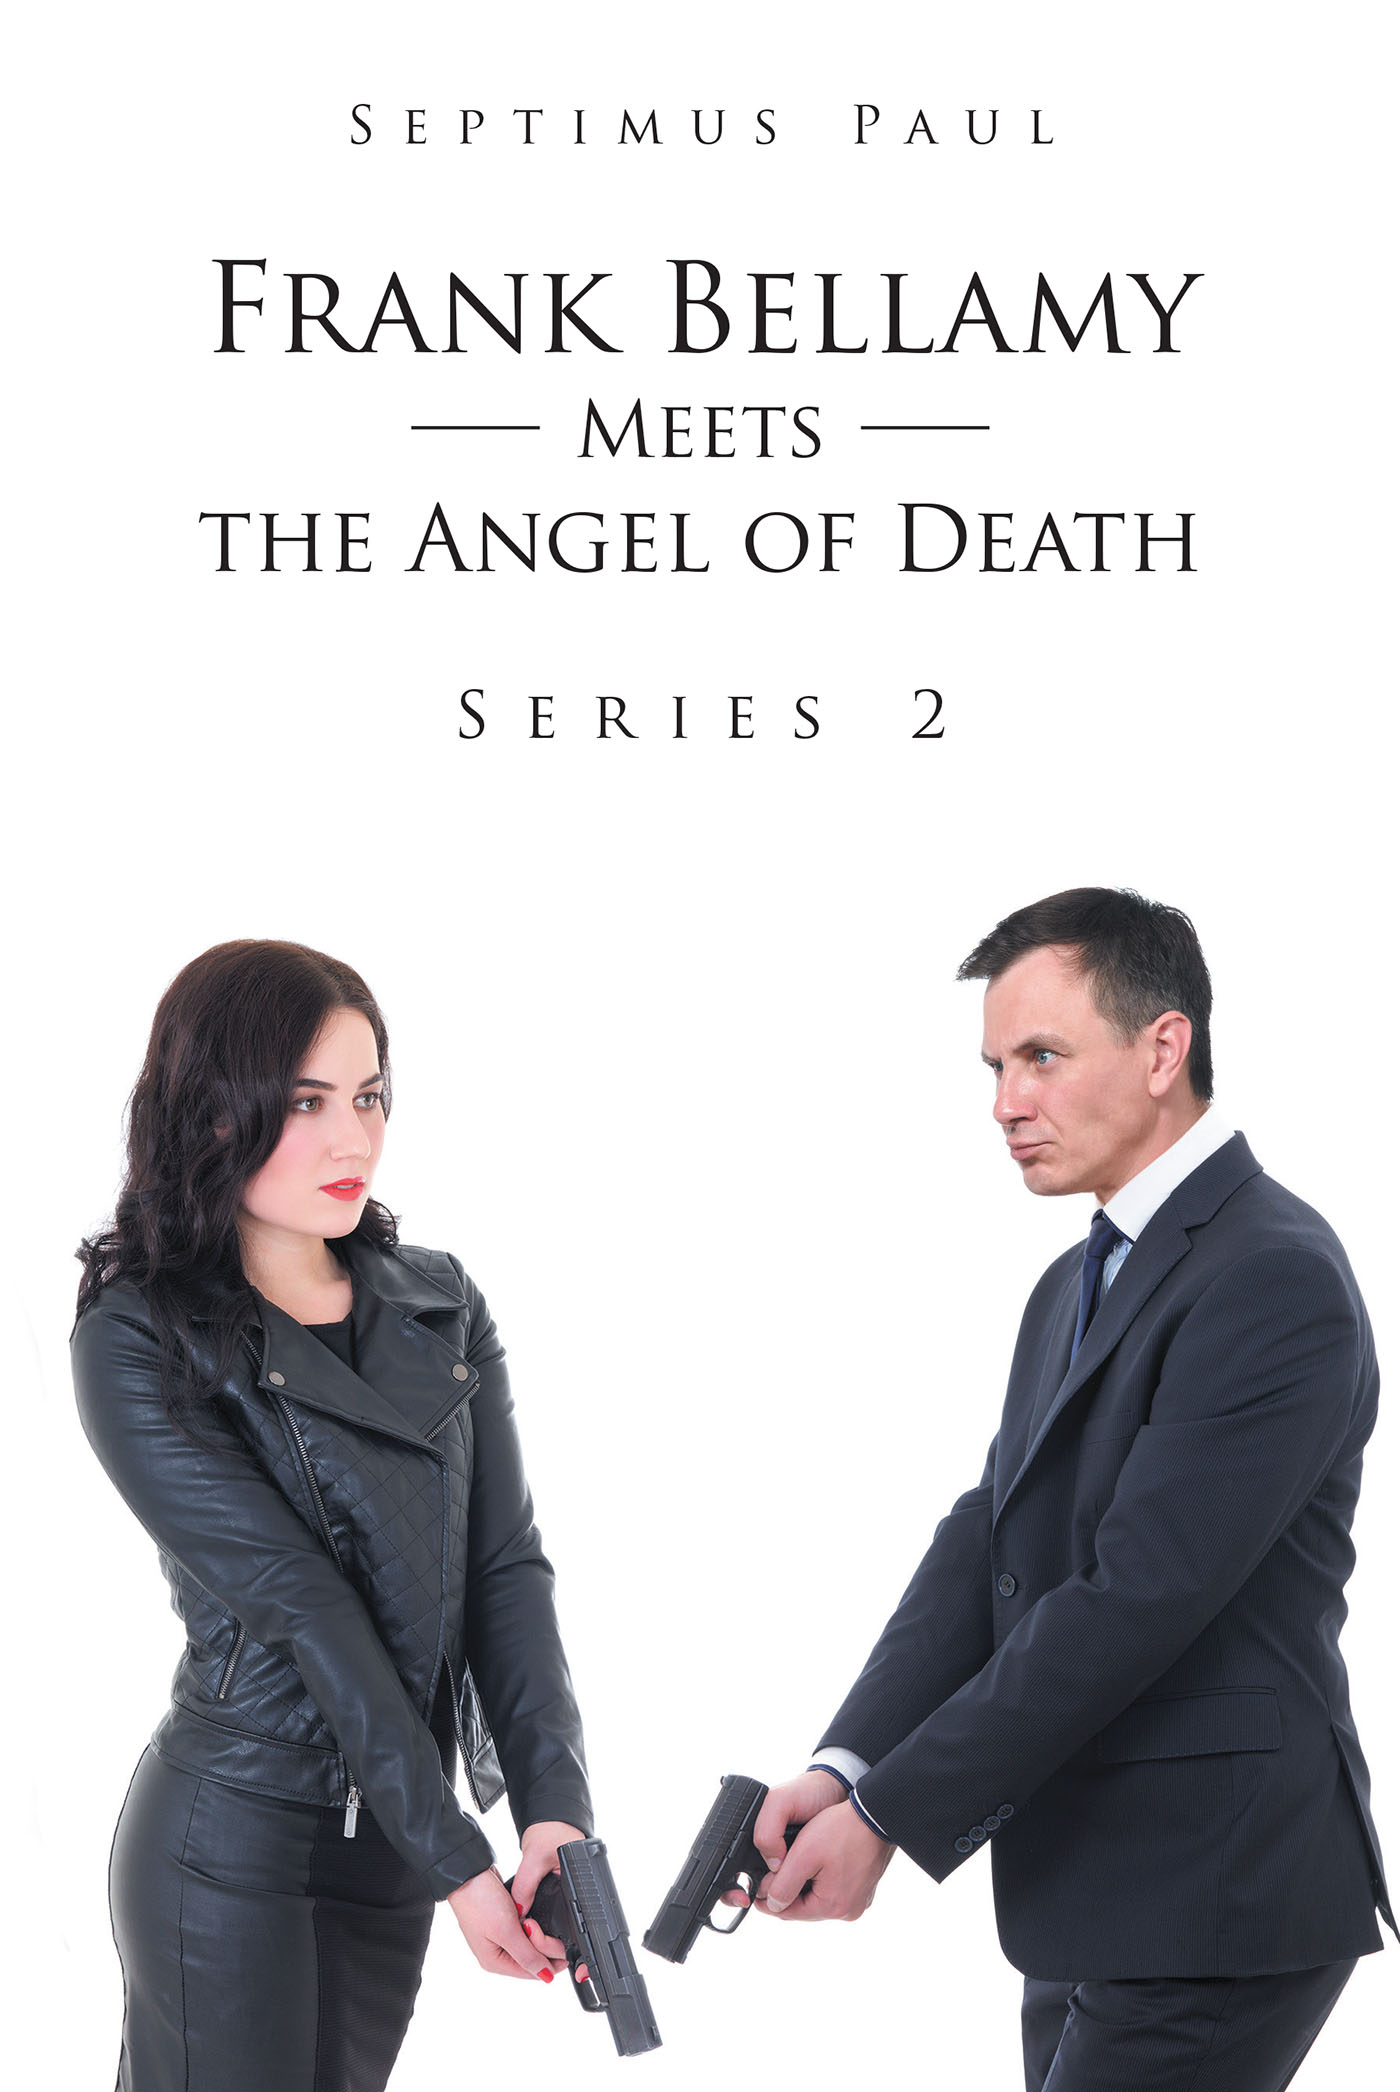 Author Septimus Paul’s New Book, “Frank Bellamy Meets the Angel of Death: Series 2,” Follows a Professional Assassin as He Navigates Clandestine & Dangerous Relationships